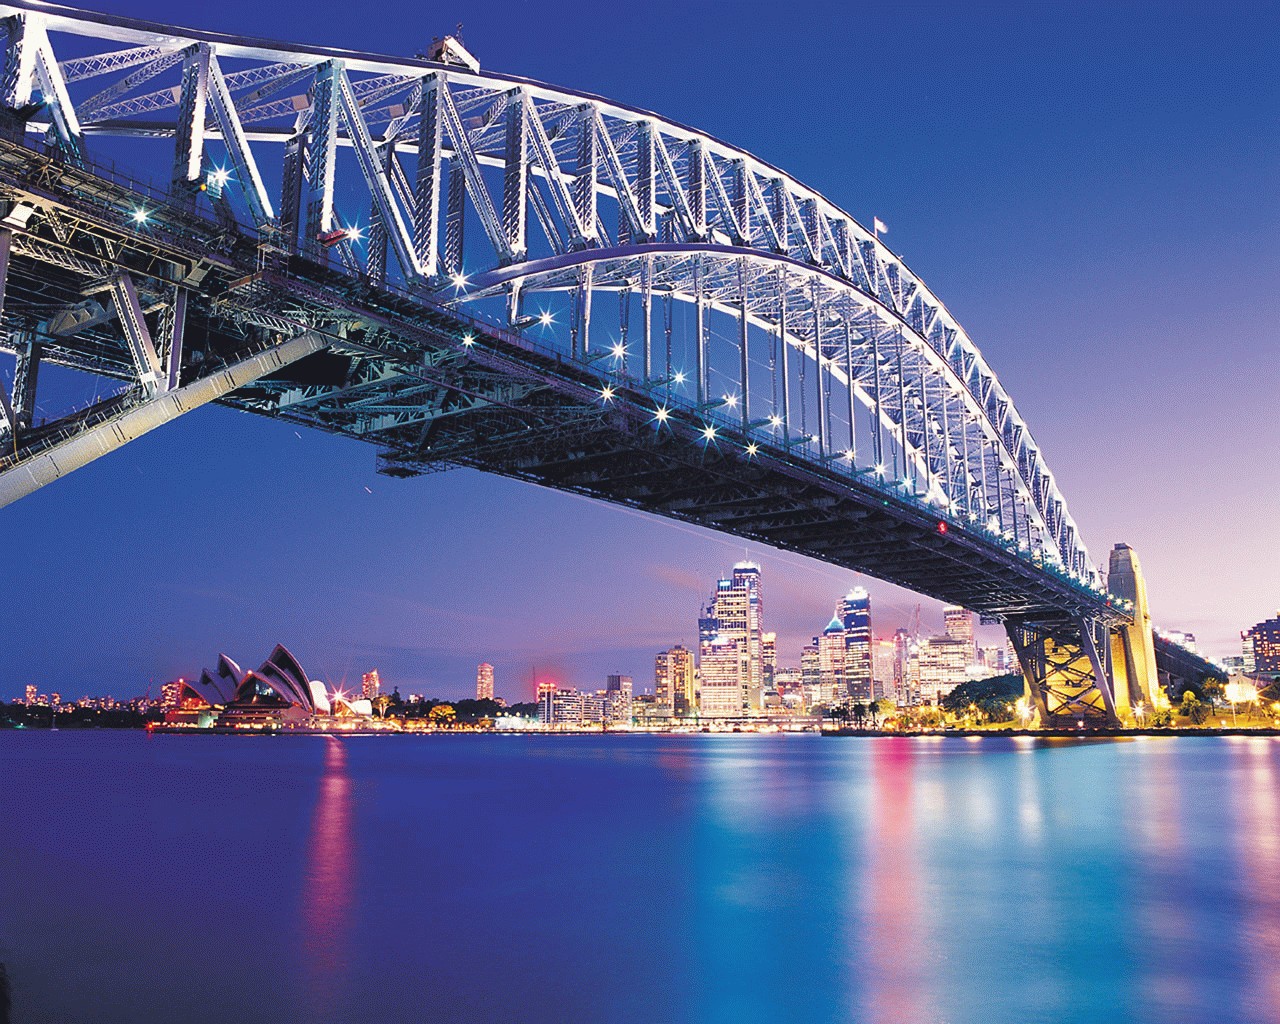 The Sydney Harbour Bridge is a staggering architectural feat of 53,000 tonnes of steel, and is a mainstay in any images of the Australian city's skyline but ...